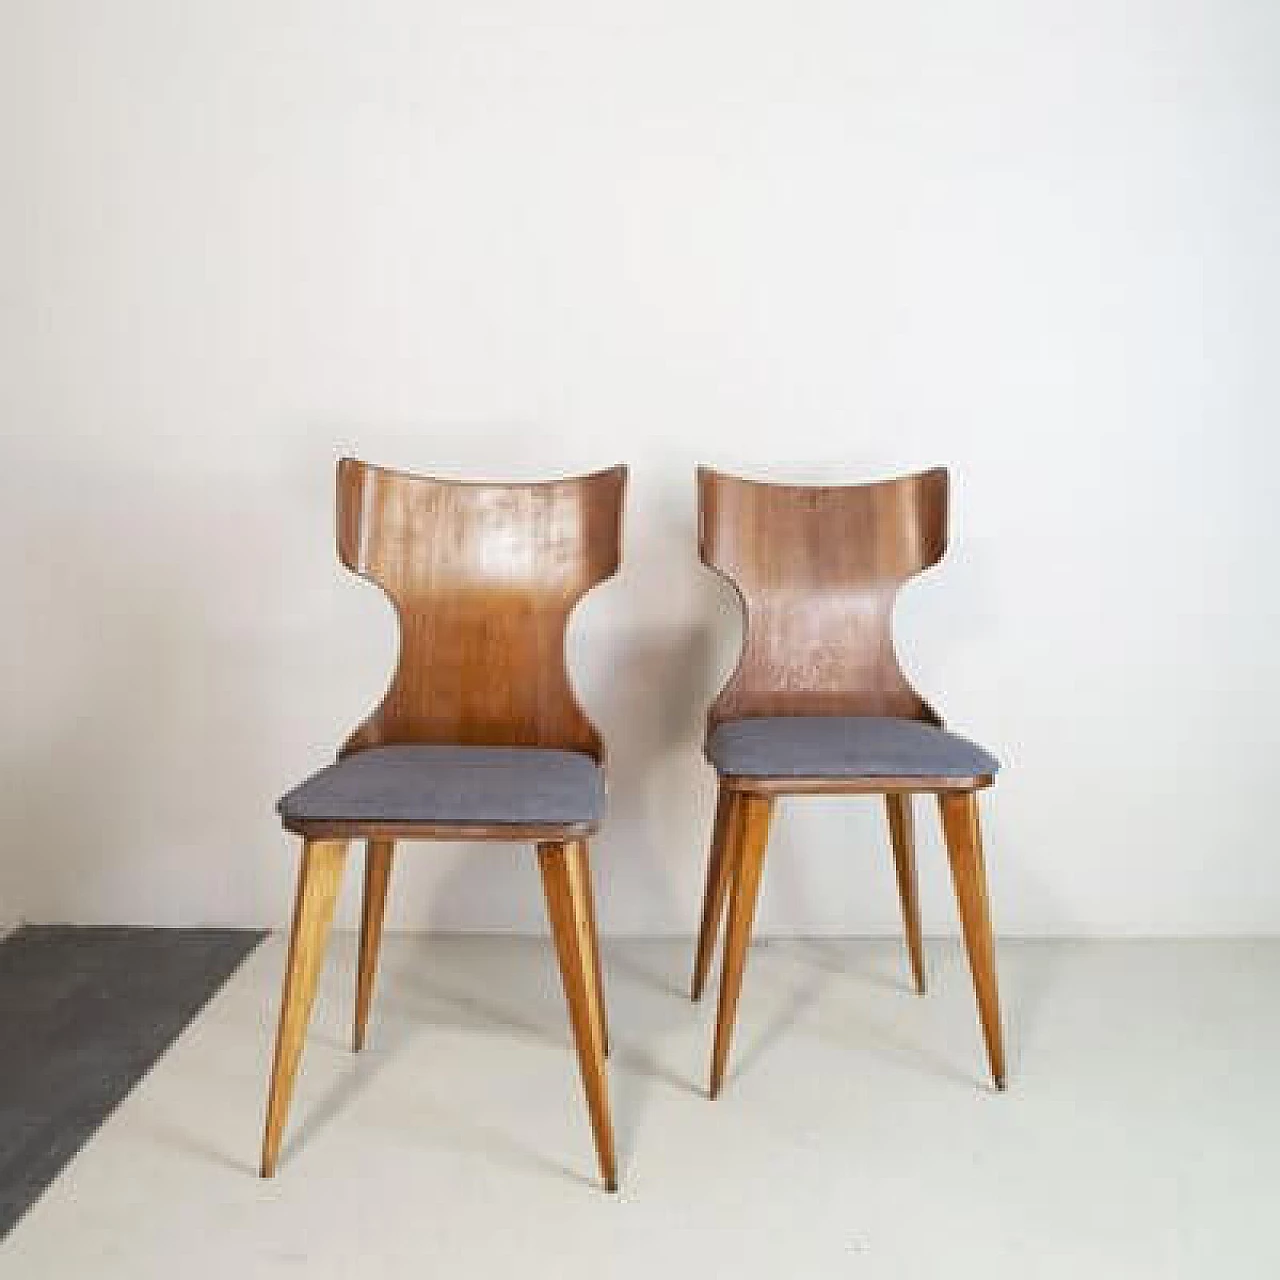 Pair of Curved Wooden Chairs by Carlo Ratti, 1950s 2